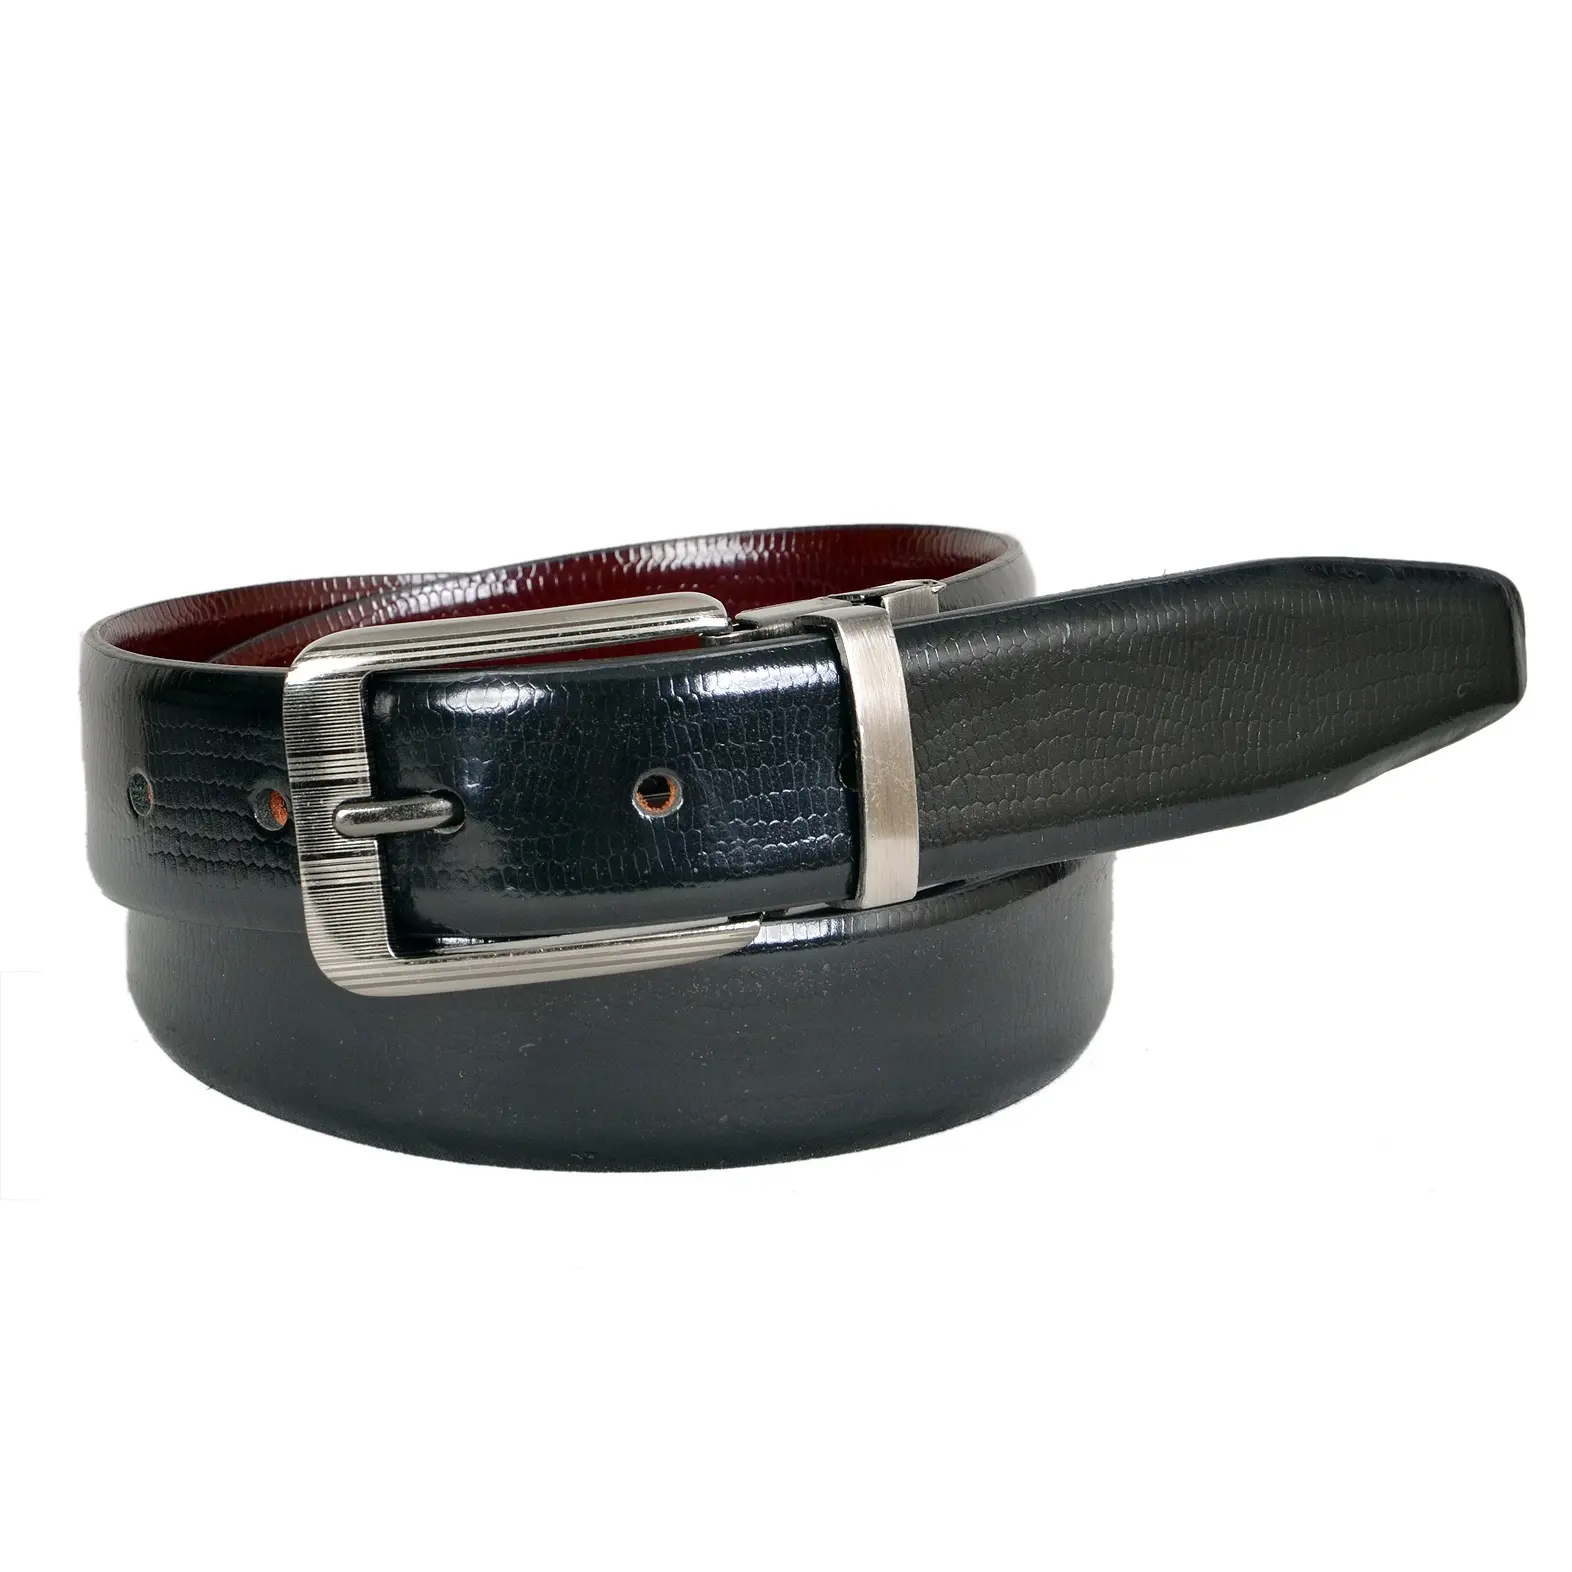 Premium Quality Print Black & Brown Reversible Leather Belt for Mens Causal Wear Leather Belt from India